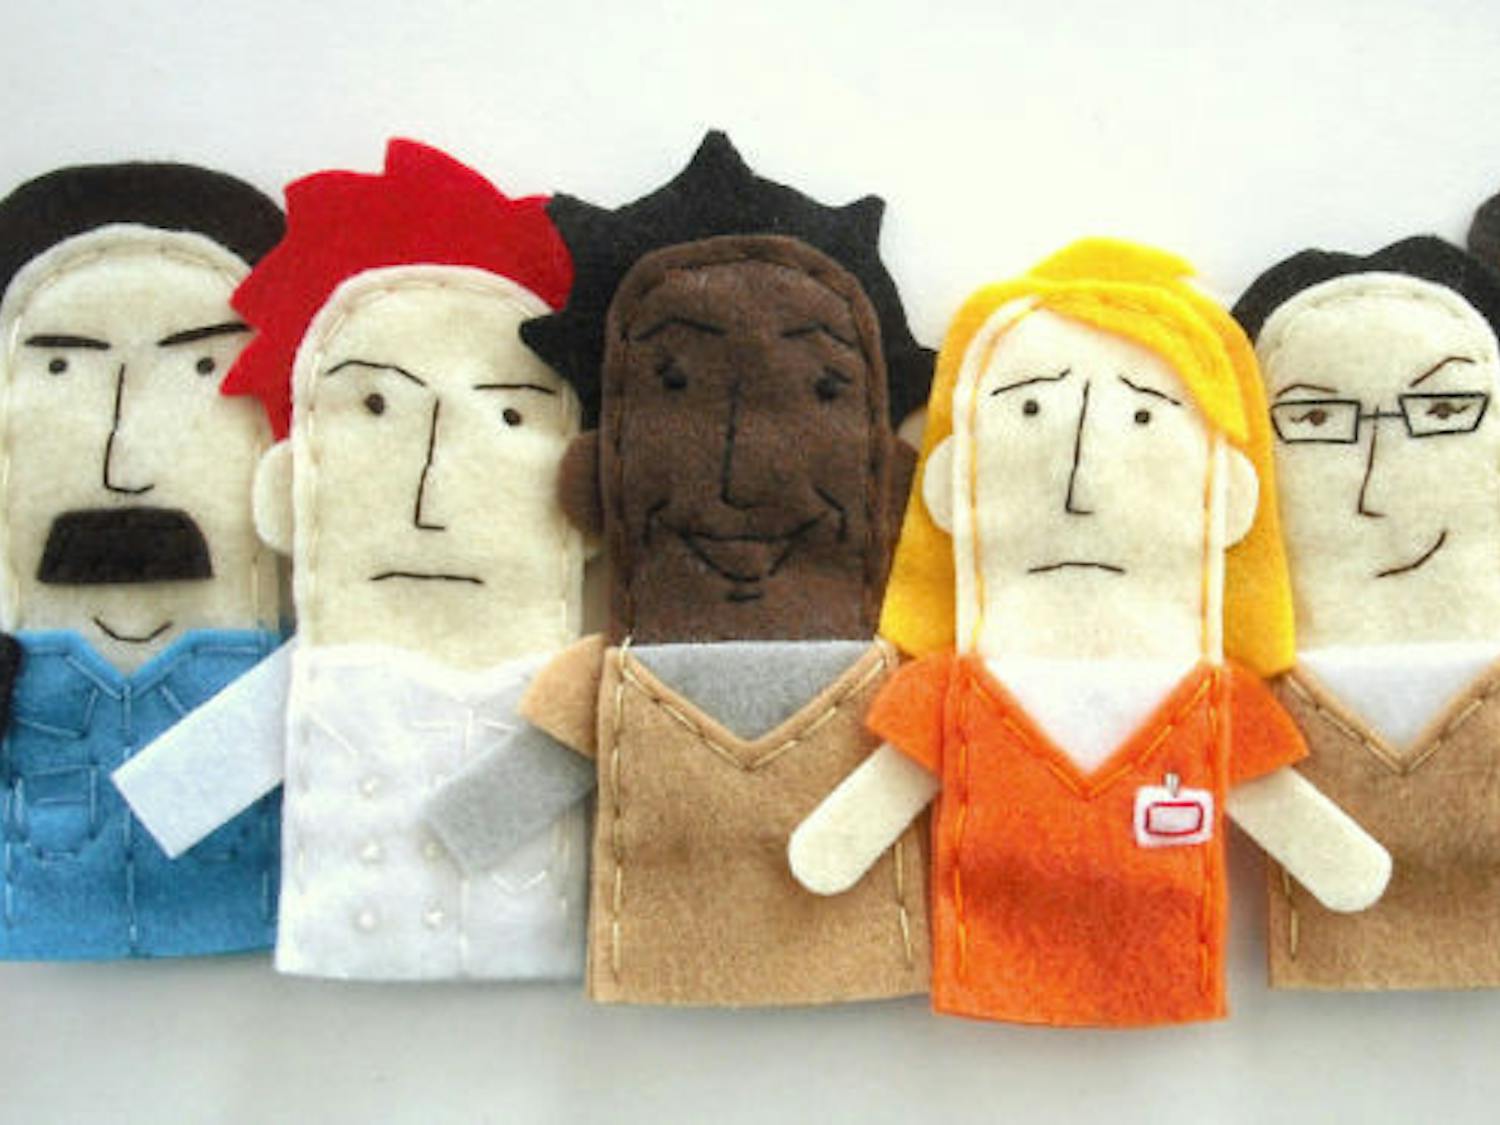 "Orange is the New Black Finger Puppets" by Abbey Hambright, used under CC BY-NC-SA 2.0